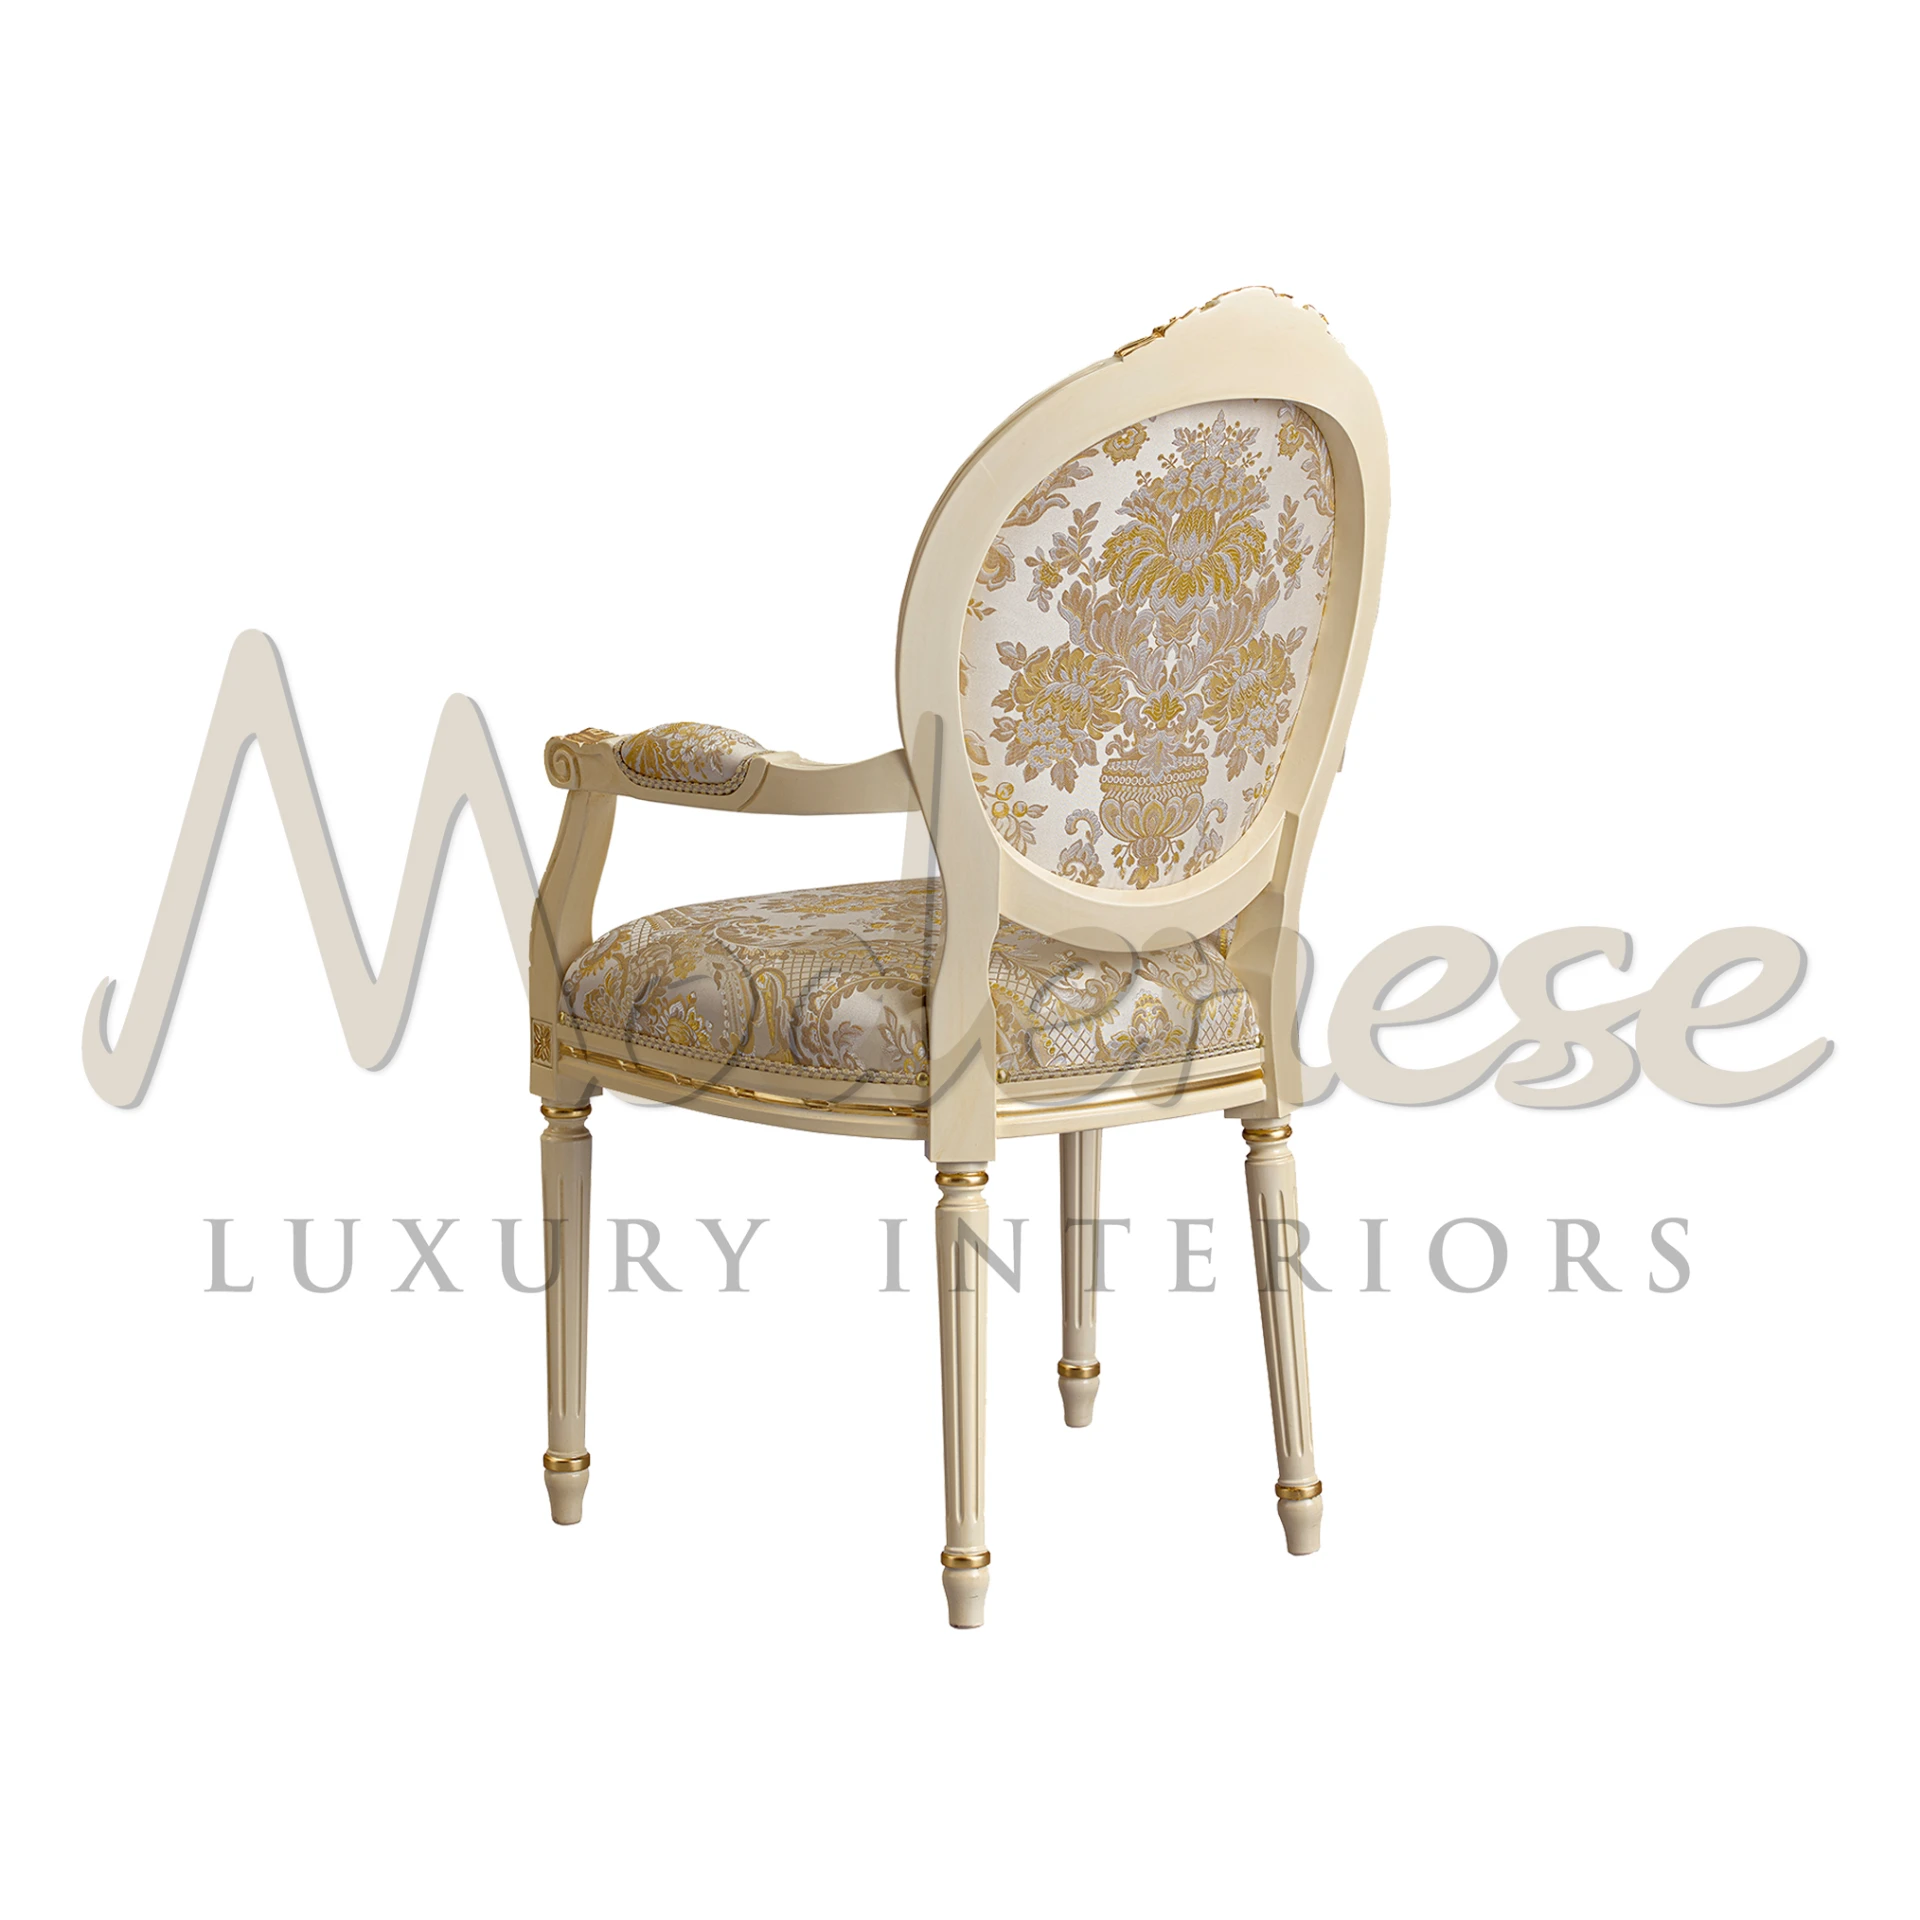 Luxurious Hand Painted chair with floral designs from Modenese Luxury Furniture.